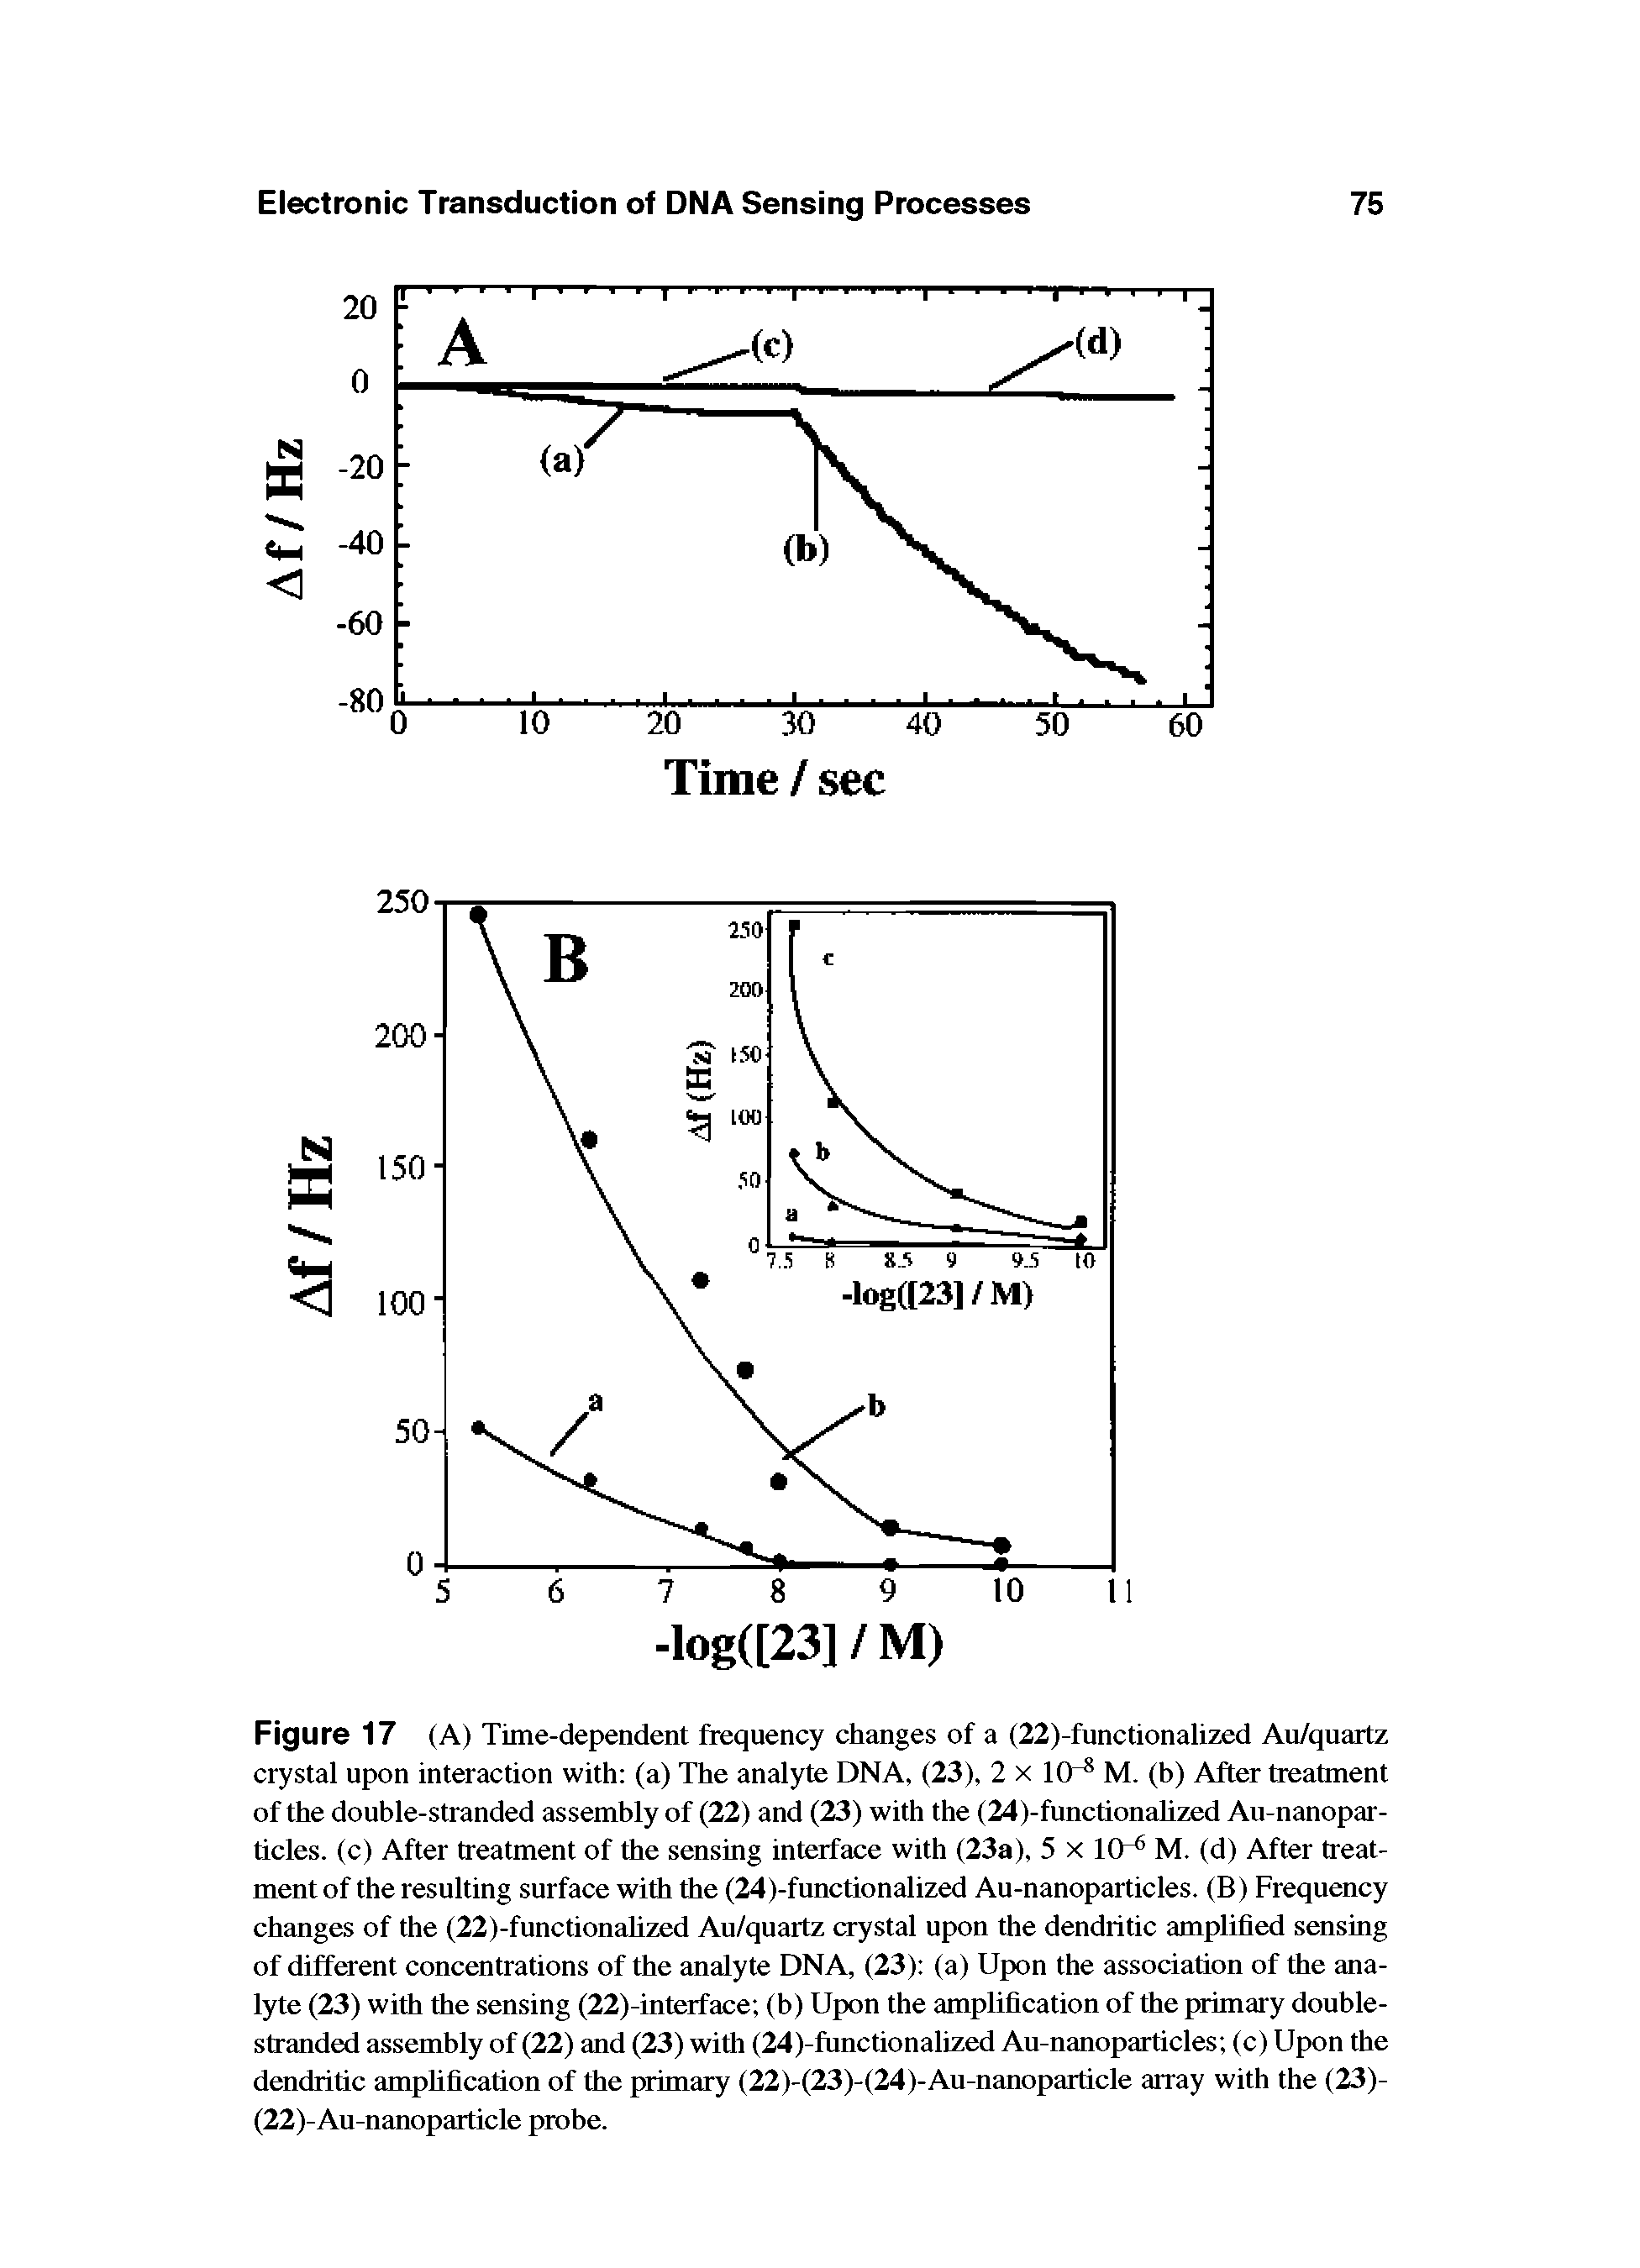 Figure 17 (A) Time-dependent frequency changes of a (22)-functionalized Au/quartz crystal upon interaction with (a) The analyte DNA, (23), 2 x 10 M. (b) After treatment of the double-stranded assembly of (22) and (23) with the (24)-functionahzed Au-nanopar-ticles. (c) After treatment of the sensing interface with (23a), 5 x KT M. (d) After treatment of the resulting surface with the (24)-functionalized Au-nanoparticles. (B) Frequency changes of the (22)-functionahzed Au/quartz crystal upon the dendritic amplified sensing of different concentrations of the analyte DNA, (23) (a) Upon the association of the analyte (23) with the sensing (22)-interface (b) Upon the amplification of the primary double-stranded assembly of (22) and (23) with (24)-functionalized Au-nanoparticles (c) Upon the dendritic amphfication of the primary (22)-(23)-(24)-Au-nanoparticle array with the (23)-(22)-Au-nanoparticle probe.